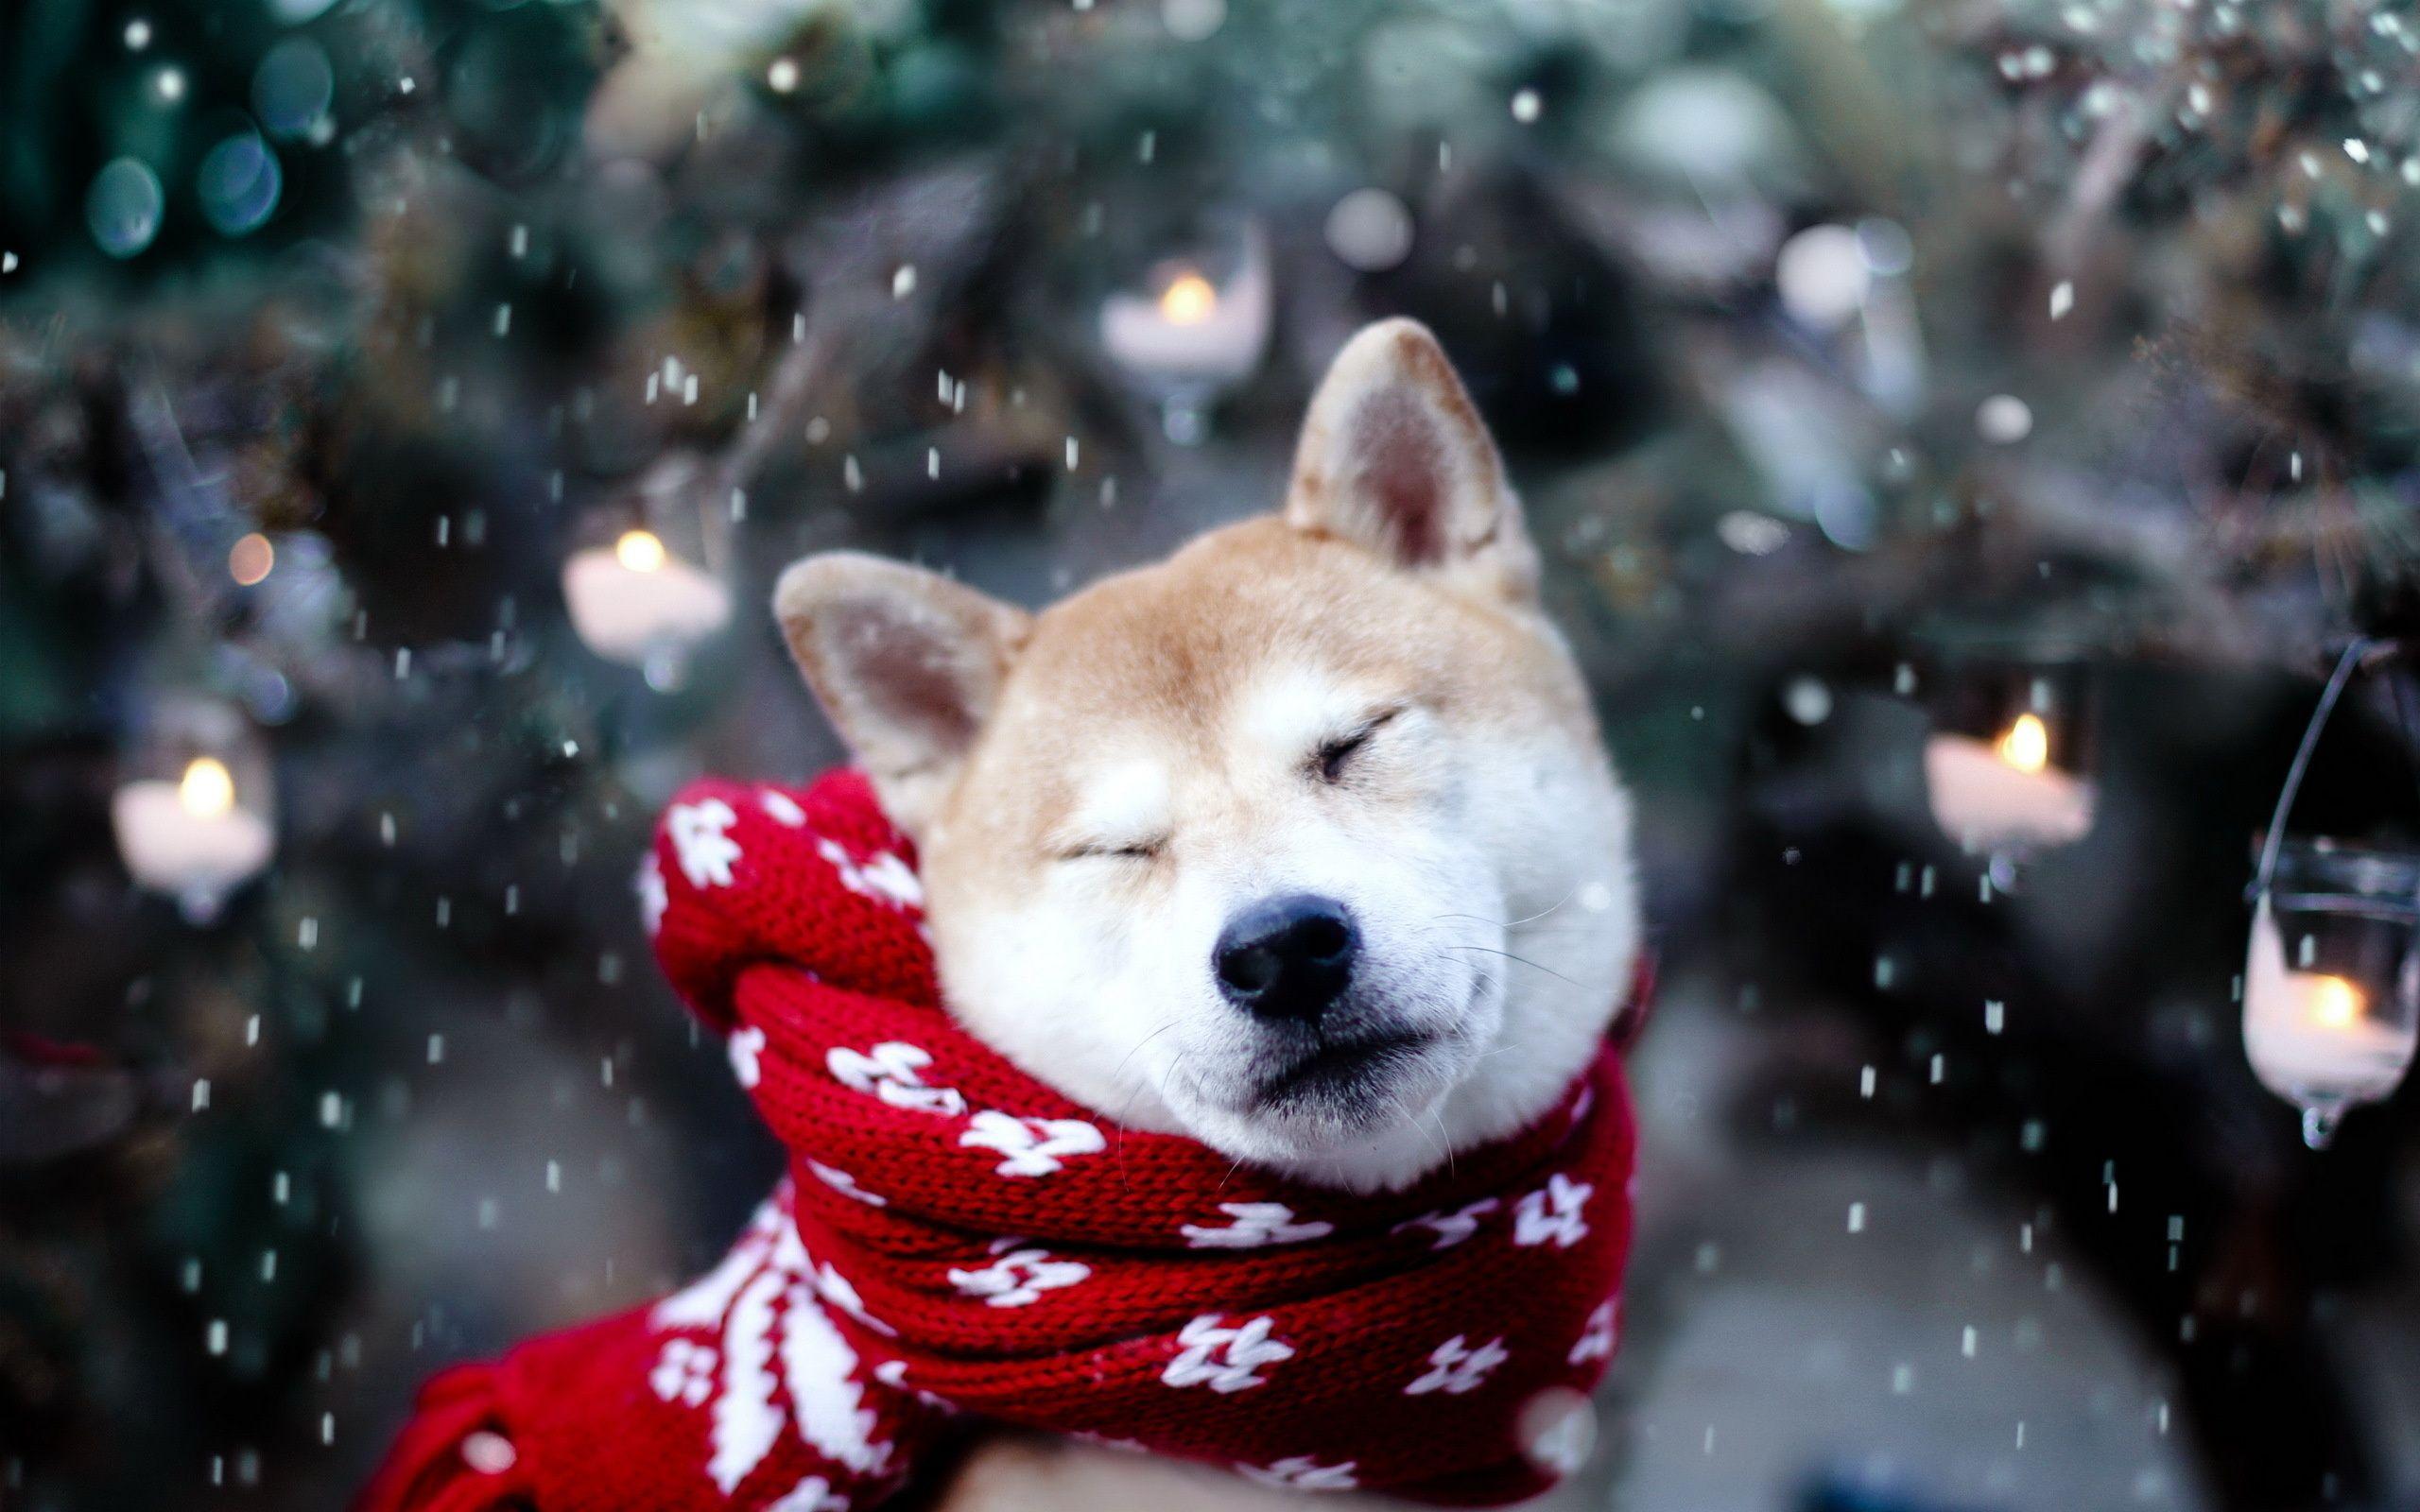 Winter Dogs Wallpapers - Wallpaper Cave